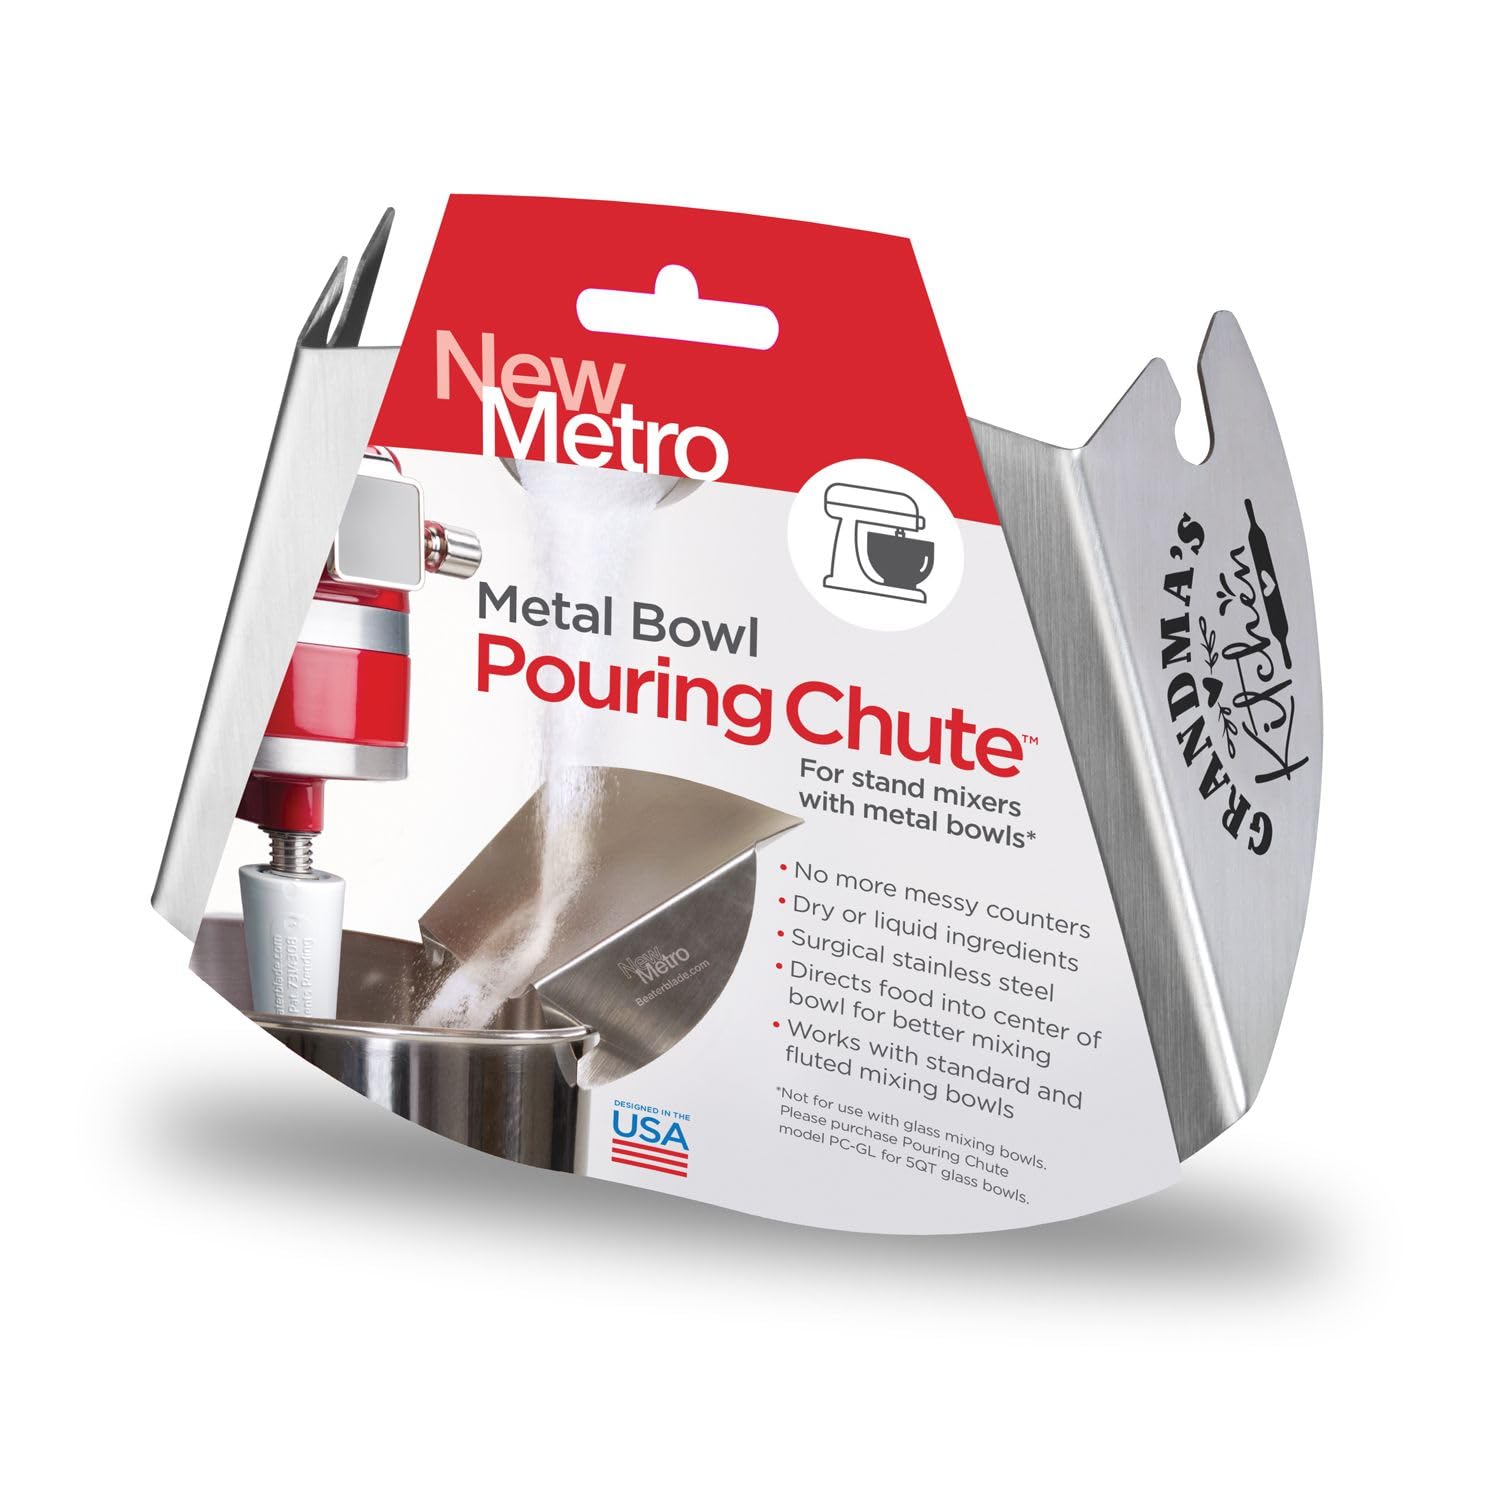 New Metro Design Pouring Chute Accessory, Fits Most Metal Stand Mixer Bowls, Grandma’s Kitchen